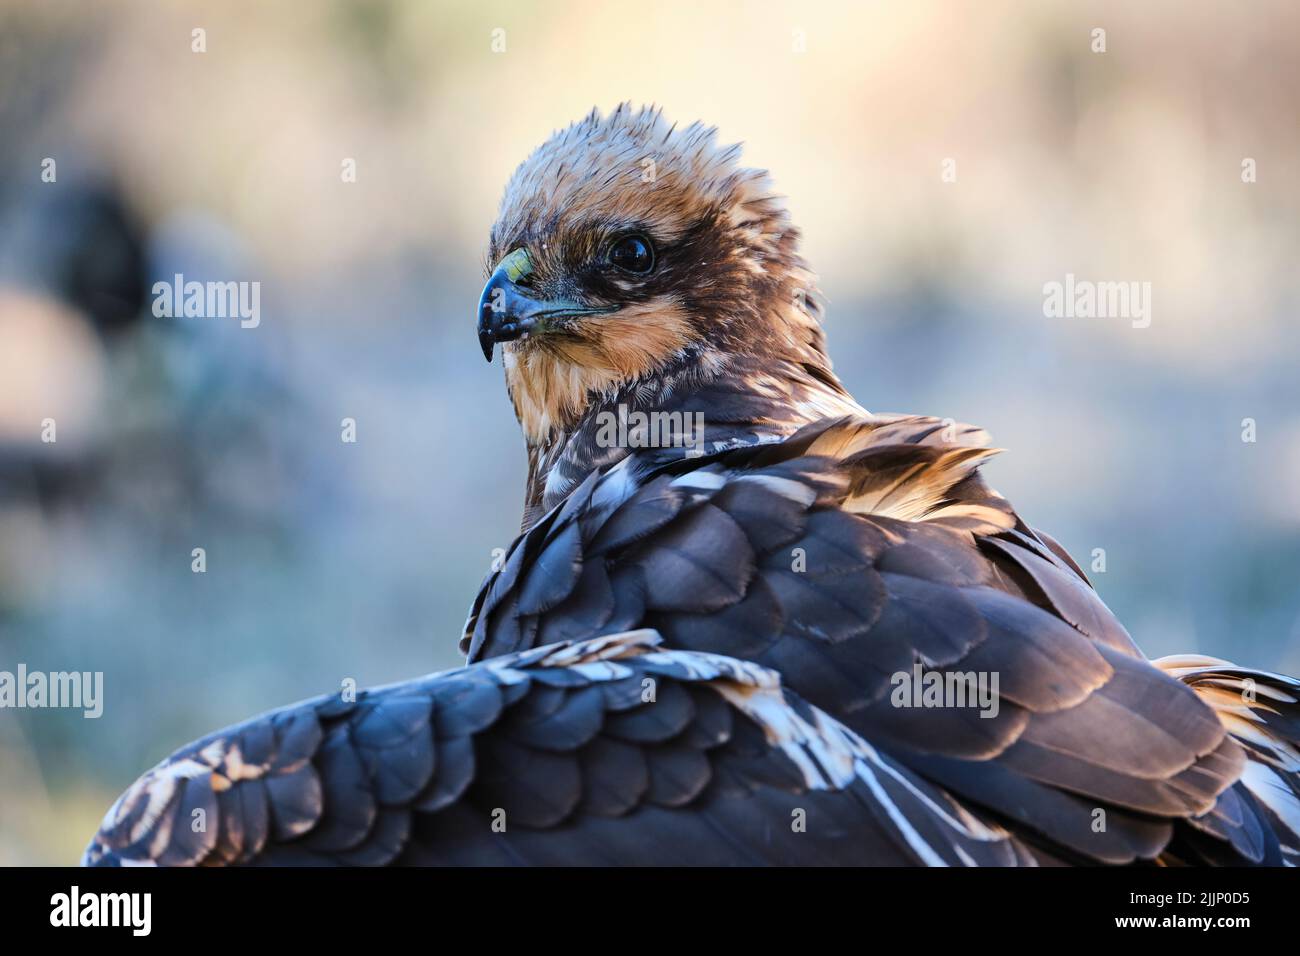 Close-up of a western marsh harrier, Circus aeruginosus, on an unfocused background with room for text. Horizontal format Stock Photo